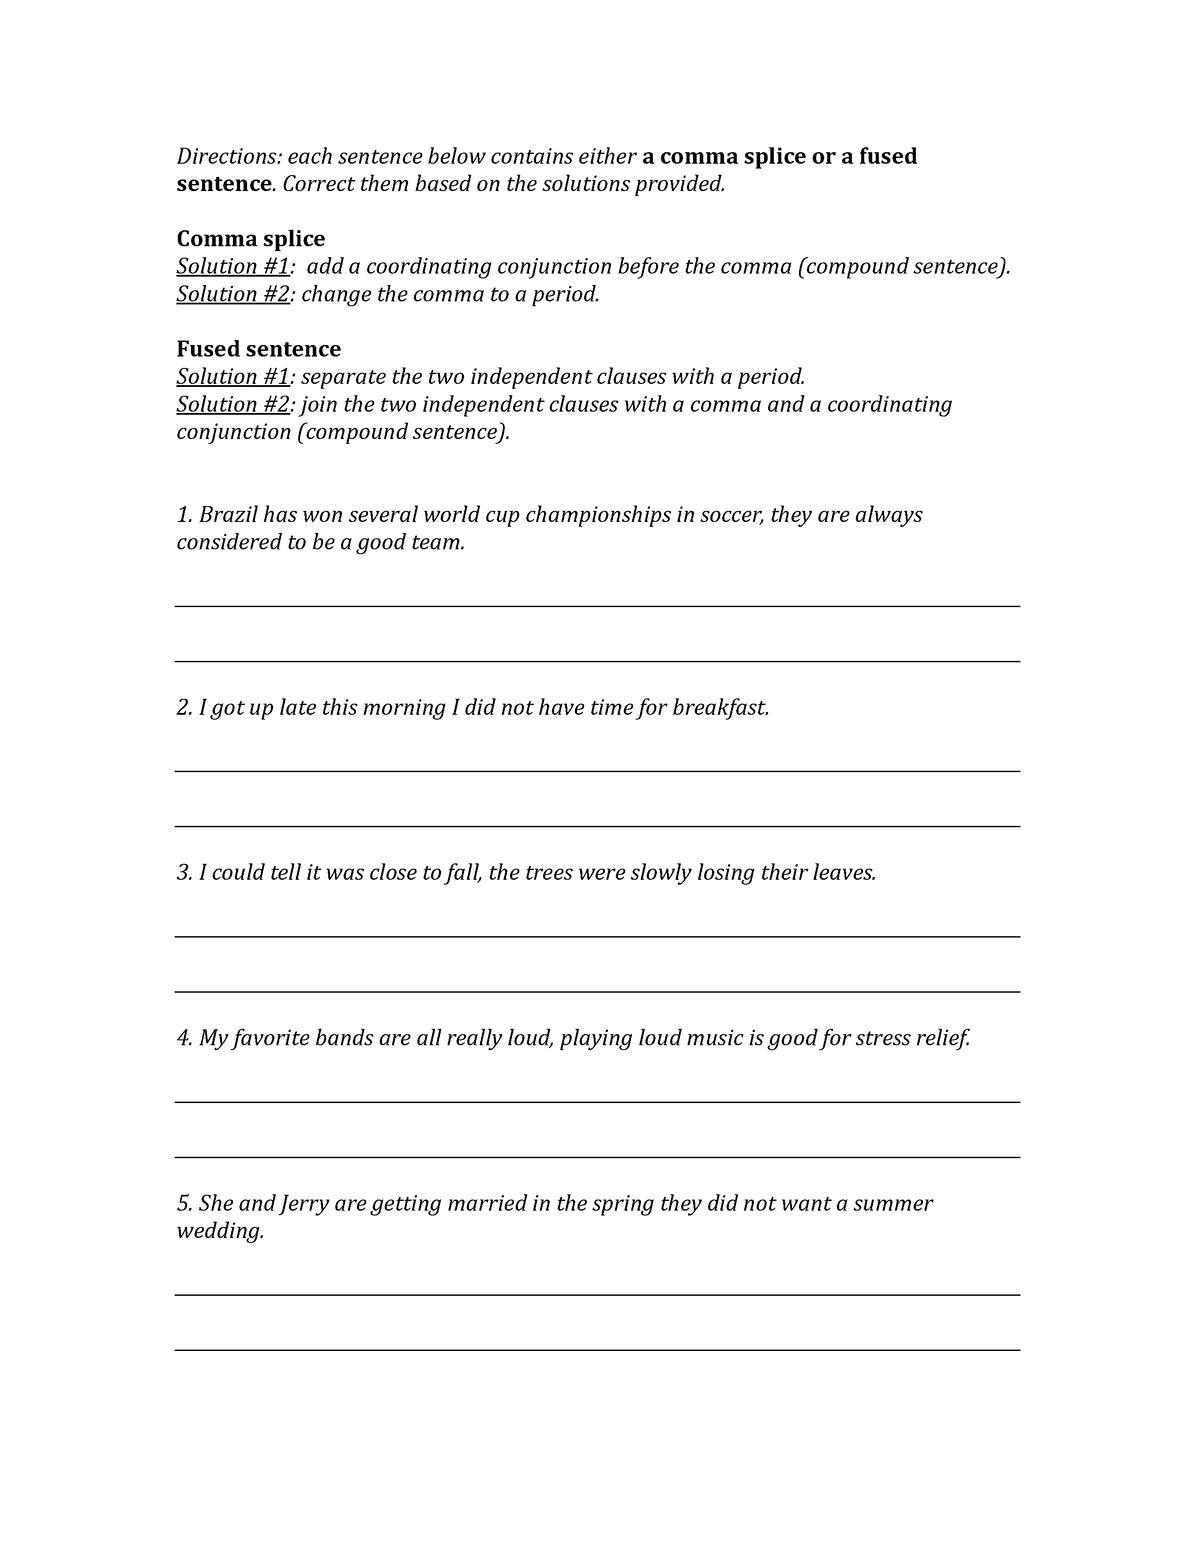 Comma Splices And Fused Sentences Worksheet Directions Each Sentence Below Contains Either A